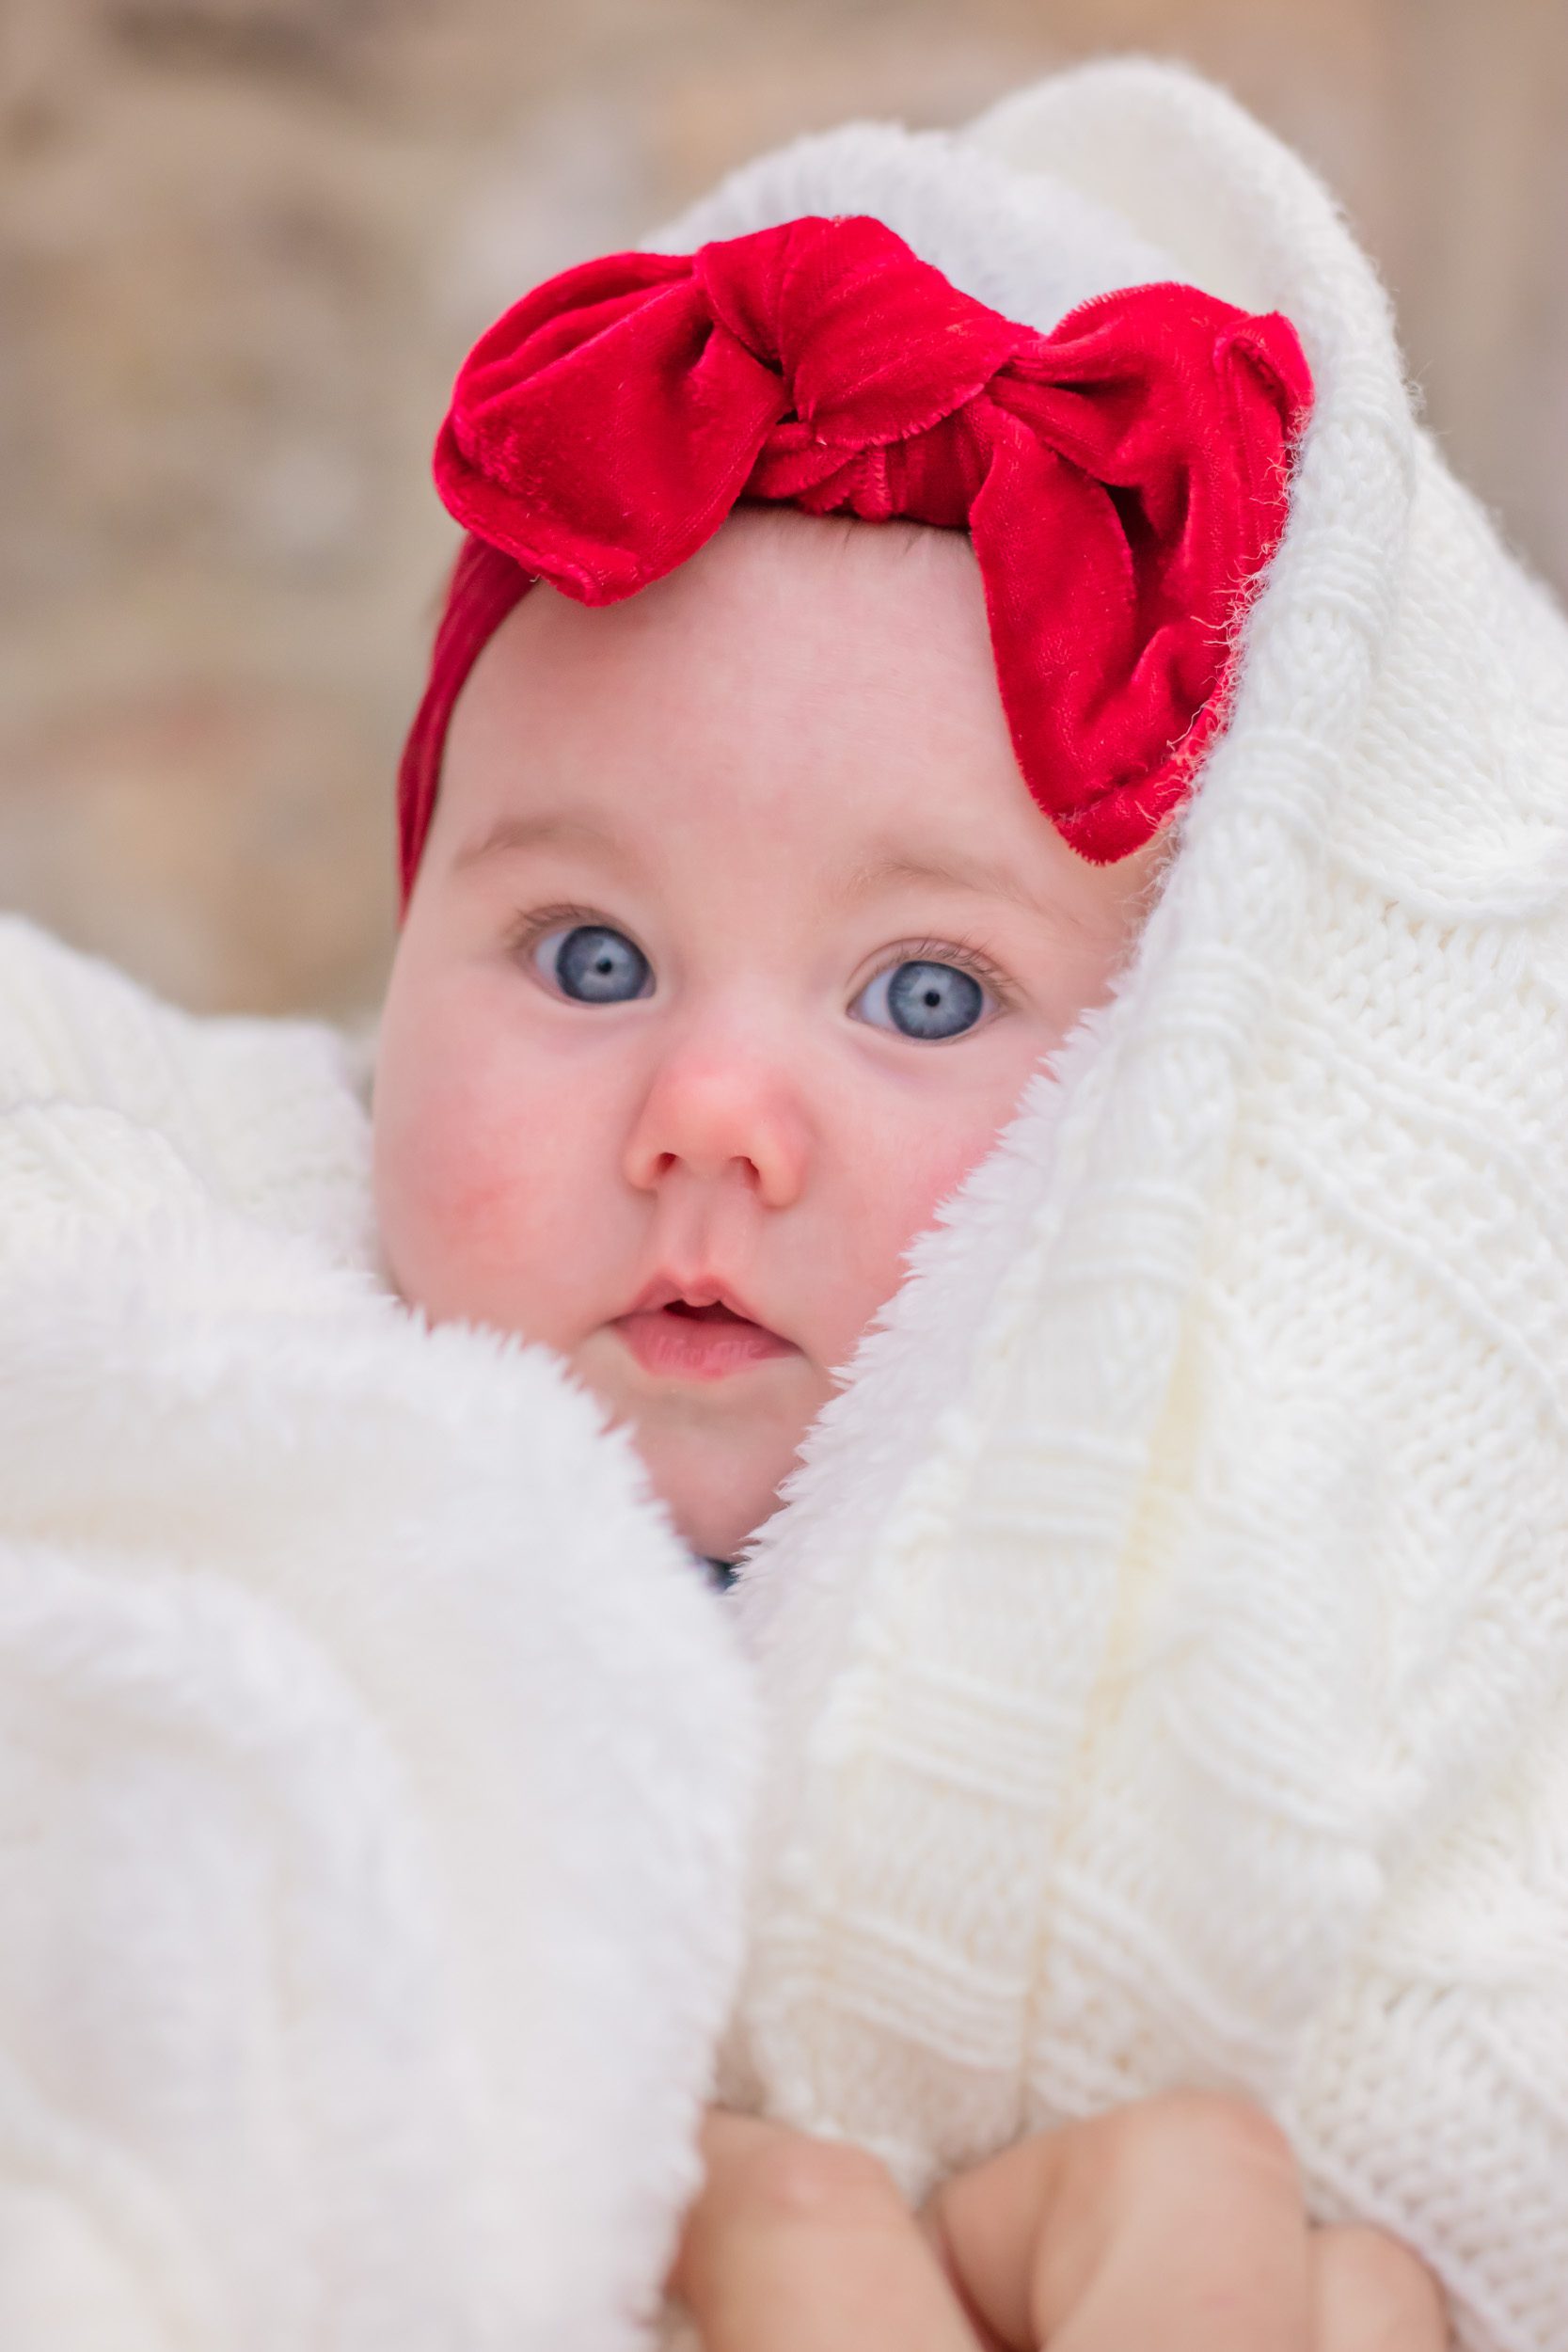 A baby girl with blue eyes and a bright red headband gazes intently at the camera while snuggled in a fuzzy white blanket during a family photoshoot